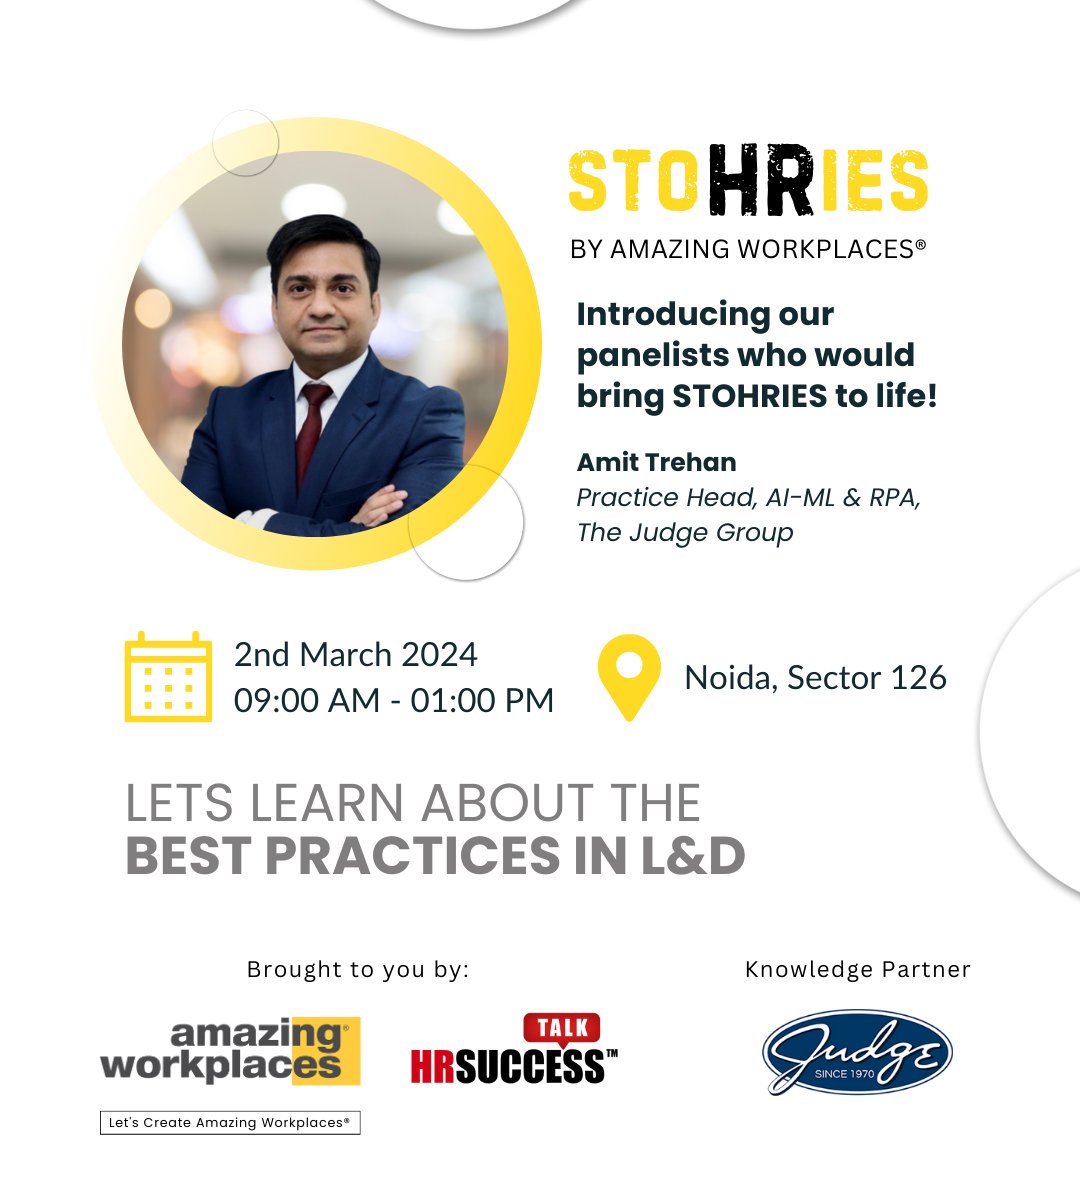 Introducing our panelists who will bring STOHRIES to life!
Amit Trehan, Practice Head, AI-ML & RPA, The Judge Group. 
#AmazingWorkplaces #STOHRIEScomingsoon #hr #hrevent #event #bestpractices #discussion #learninganddevelopment #learning #learningmanagementsystem